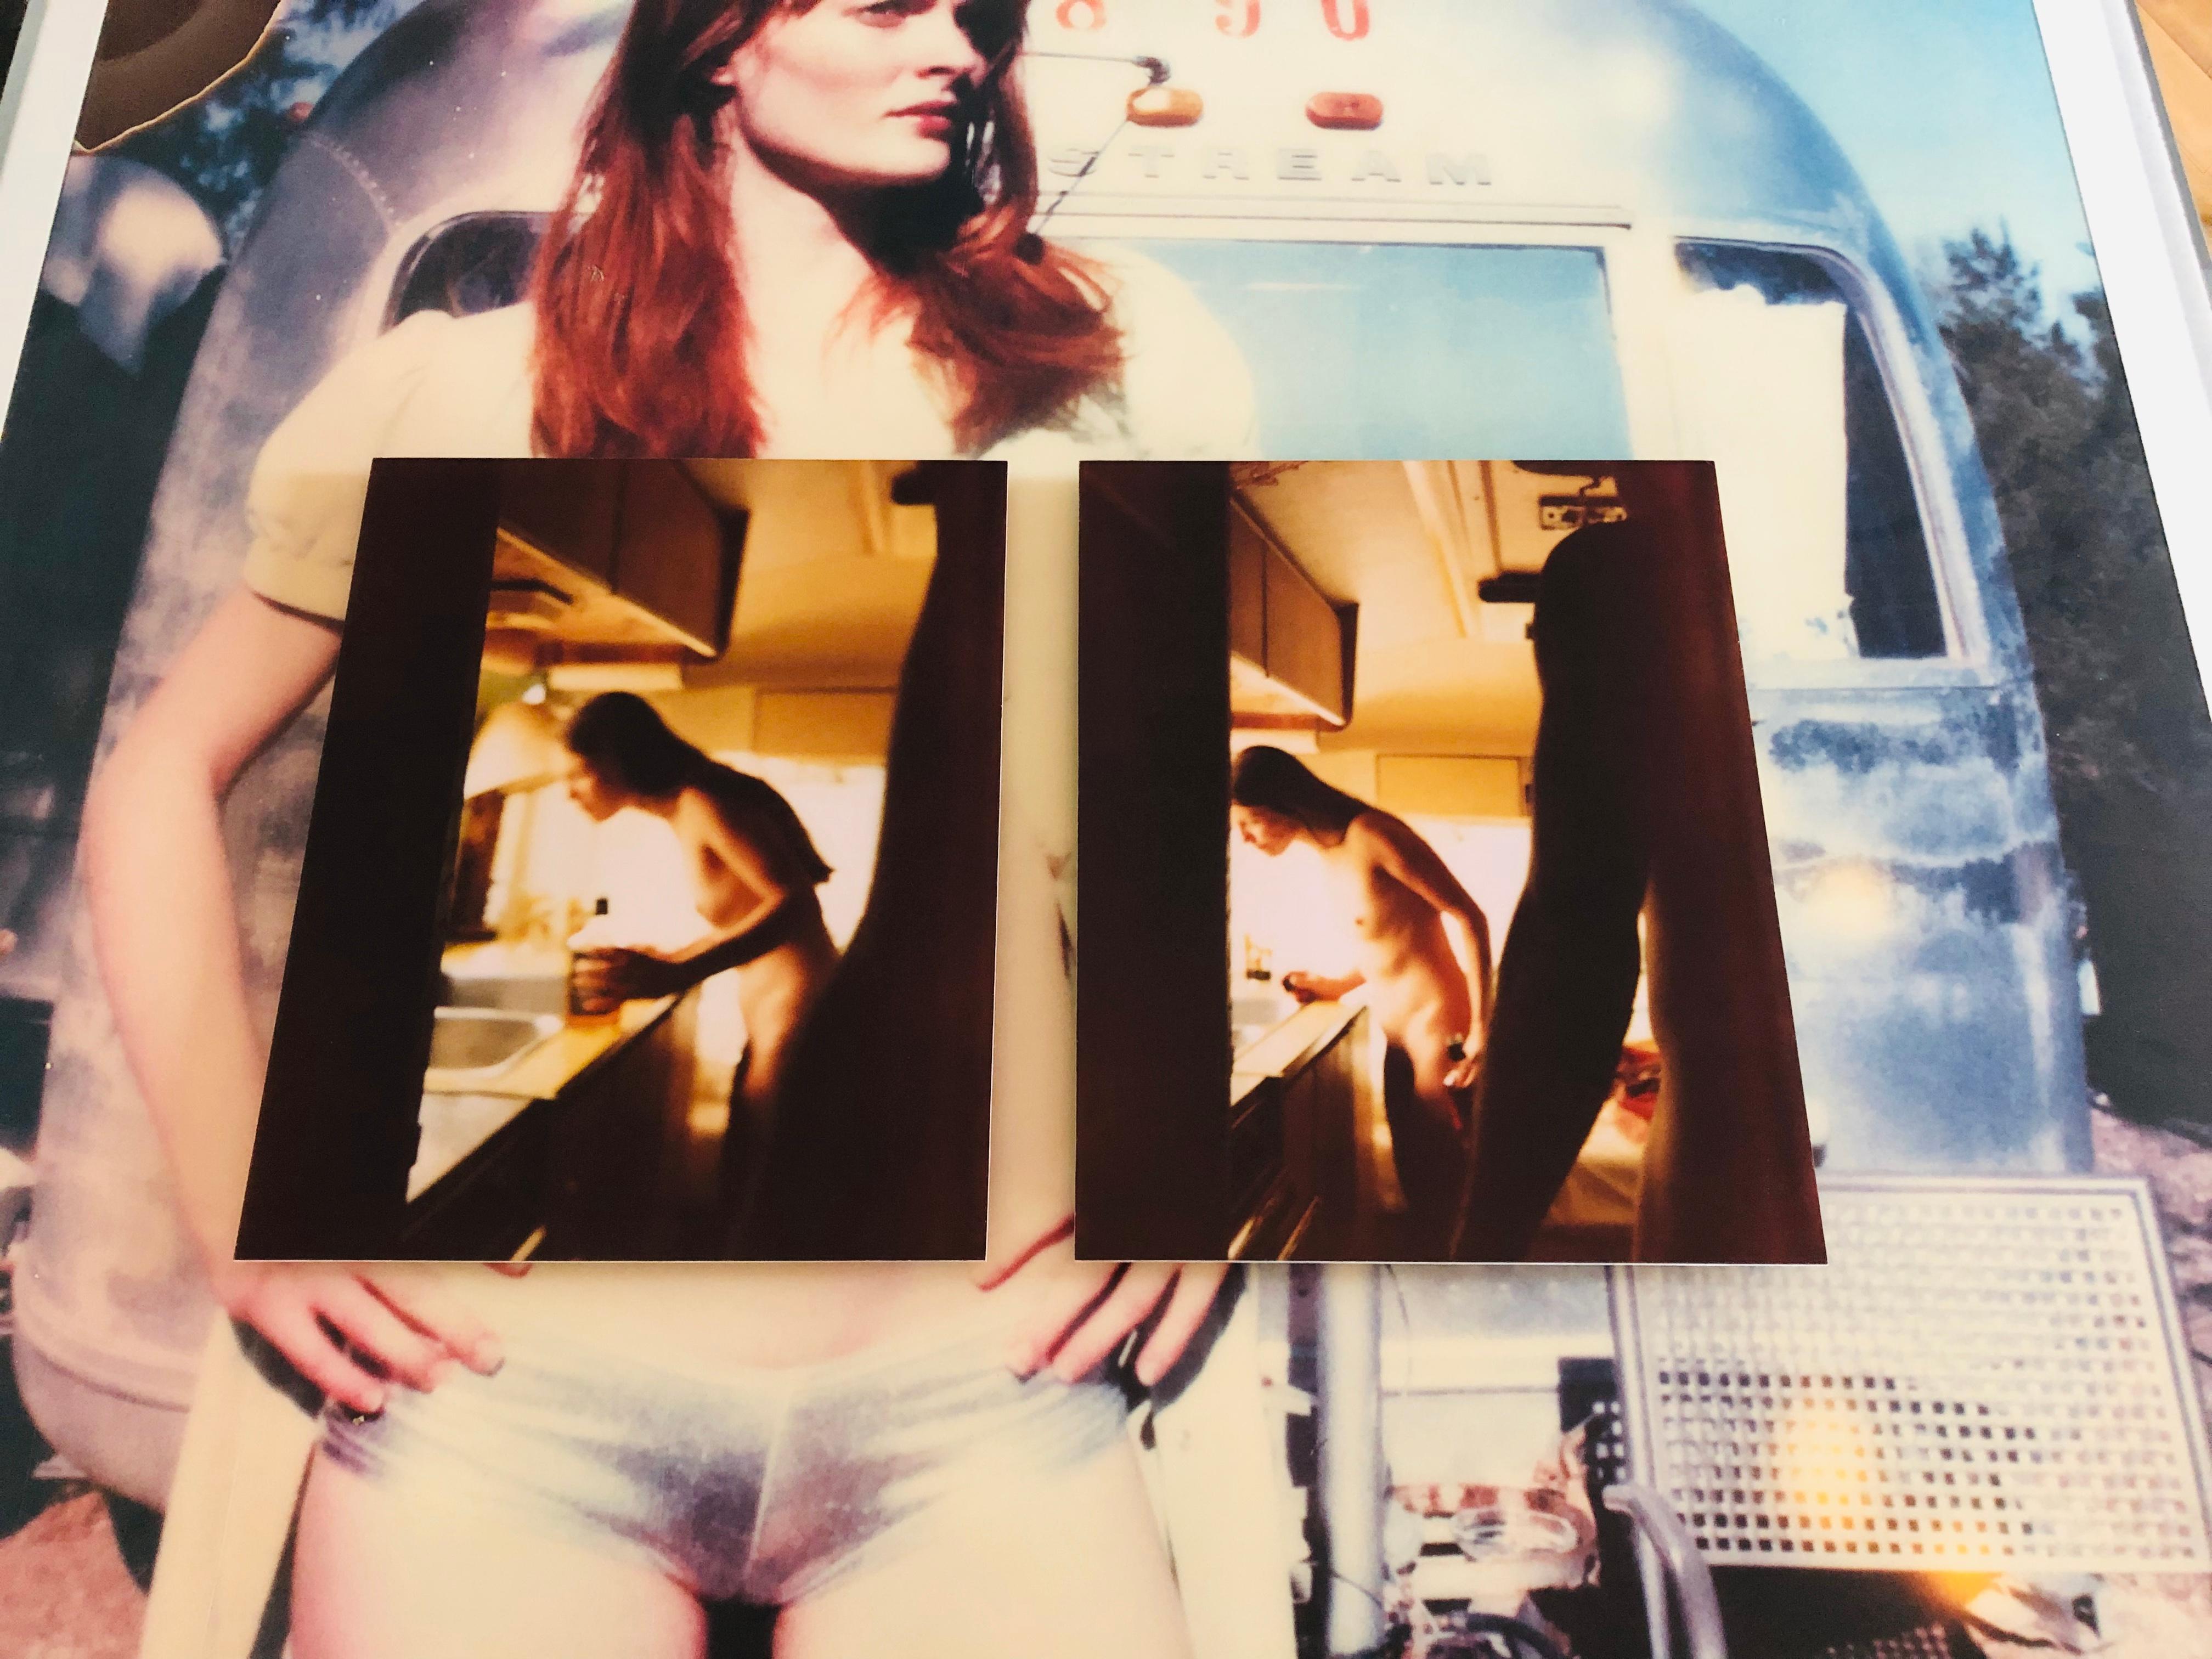 Whisky and Water VI - Sidewinder - Diptych, Polaroid, Nude, 21st Century, Color - Brown Nude Photograph by Stefanie Schneider